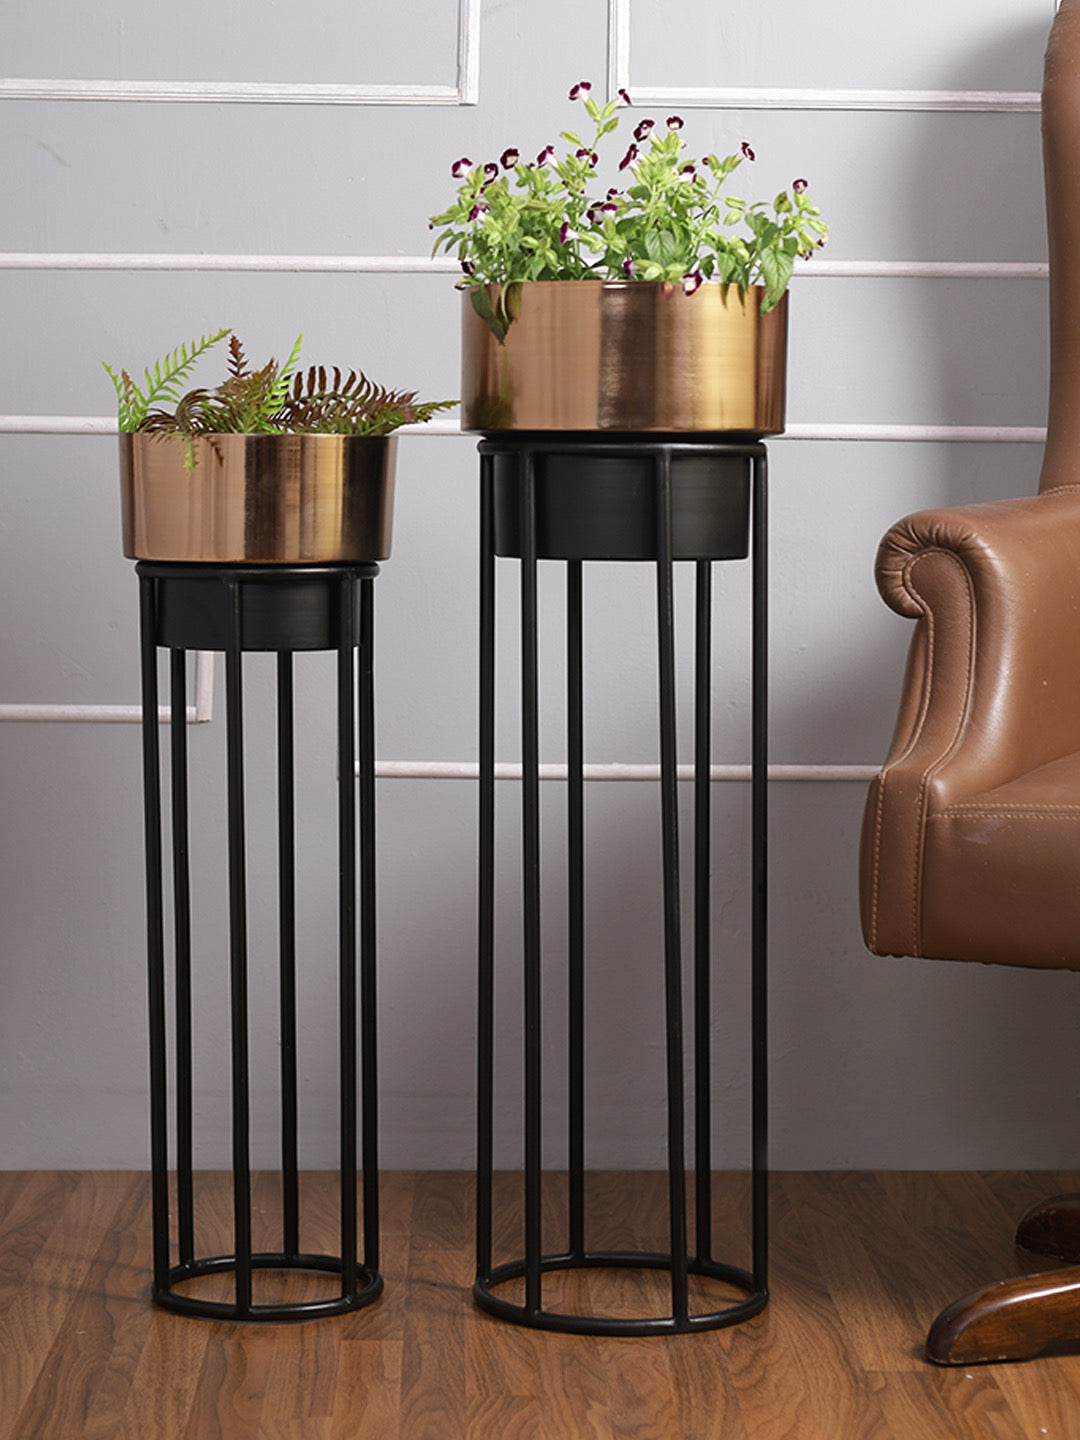 Set of 2 Golden Planters with Stand - Default Title (CHM2204_2)